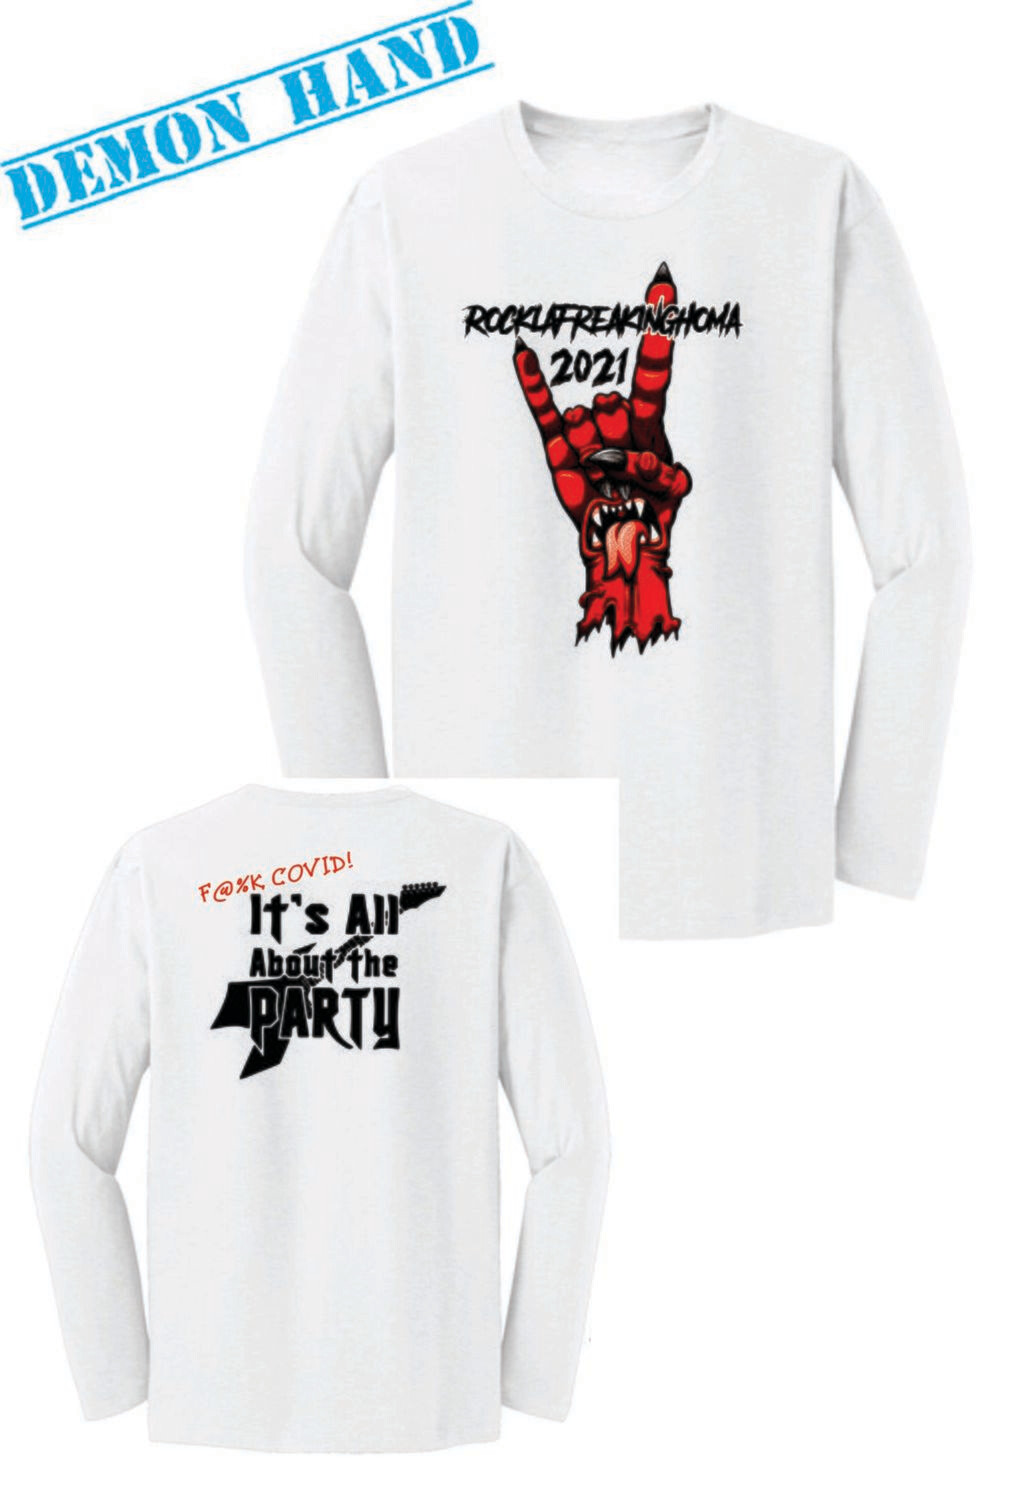 DT6200 - District ® Very Important Tee ® Long Sleeve